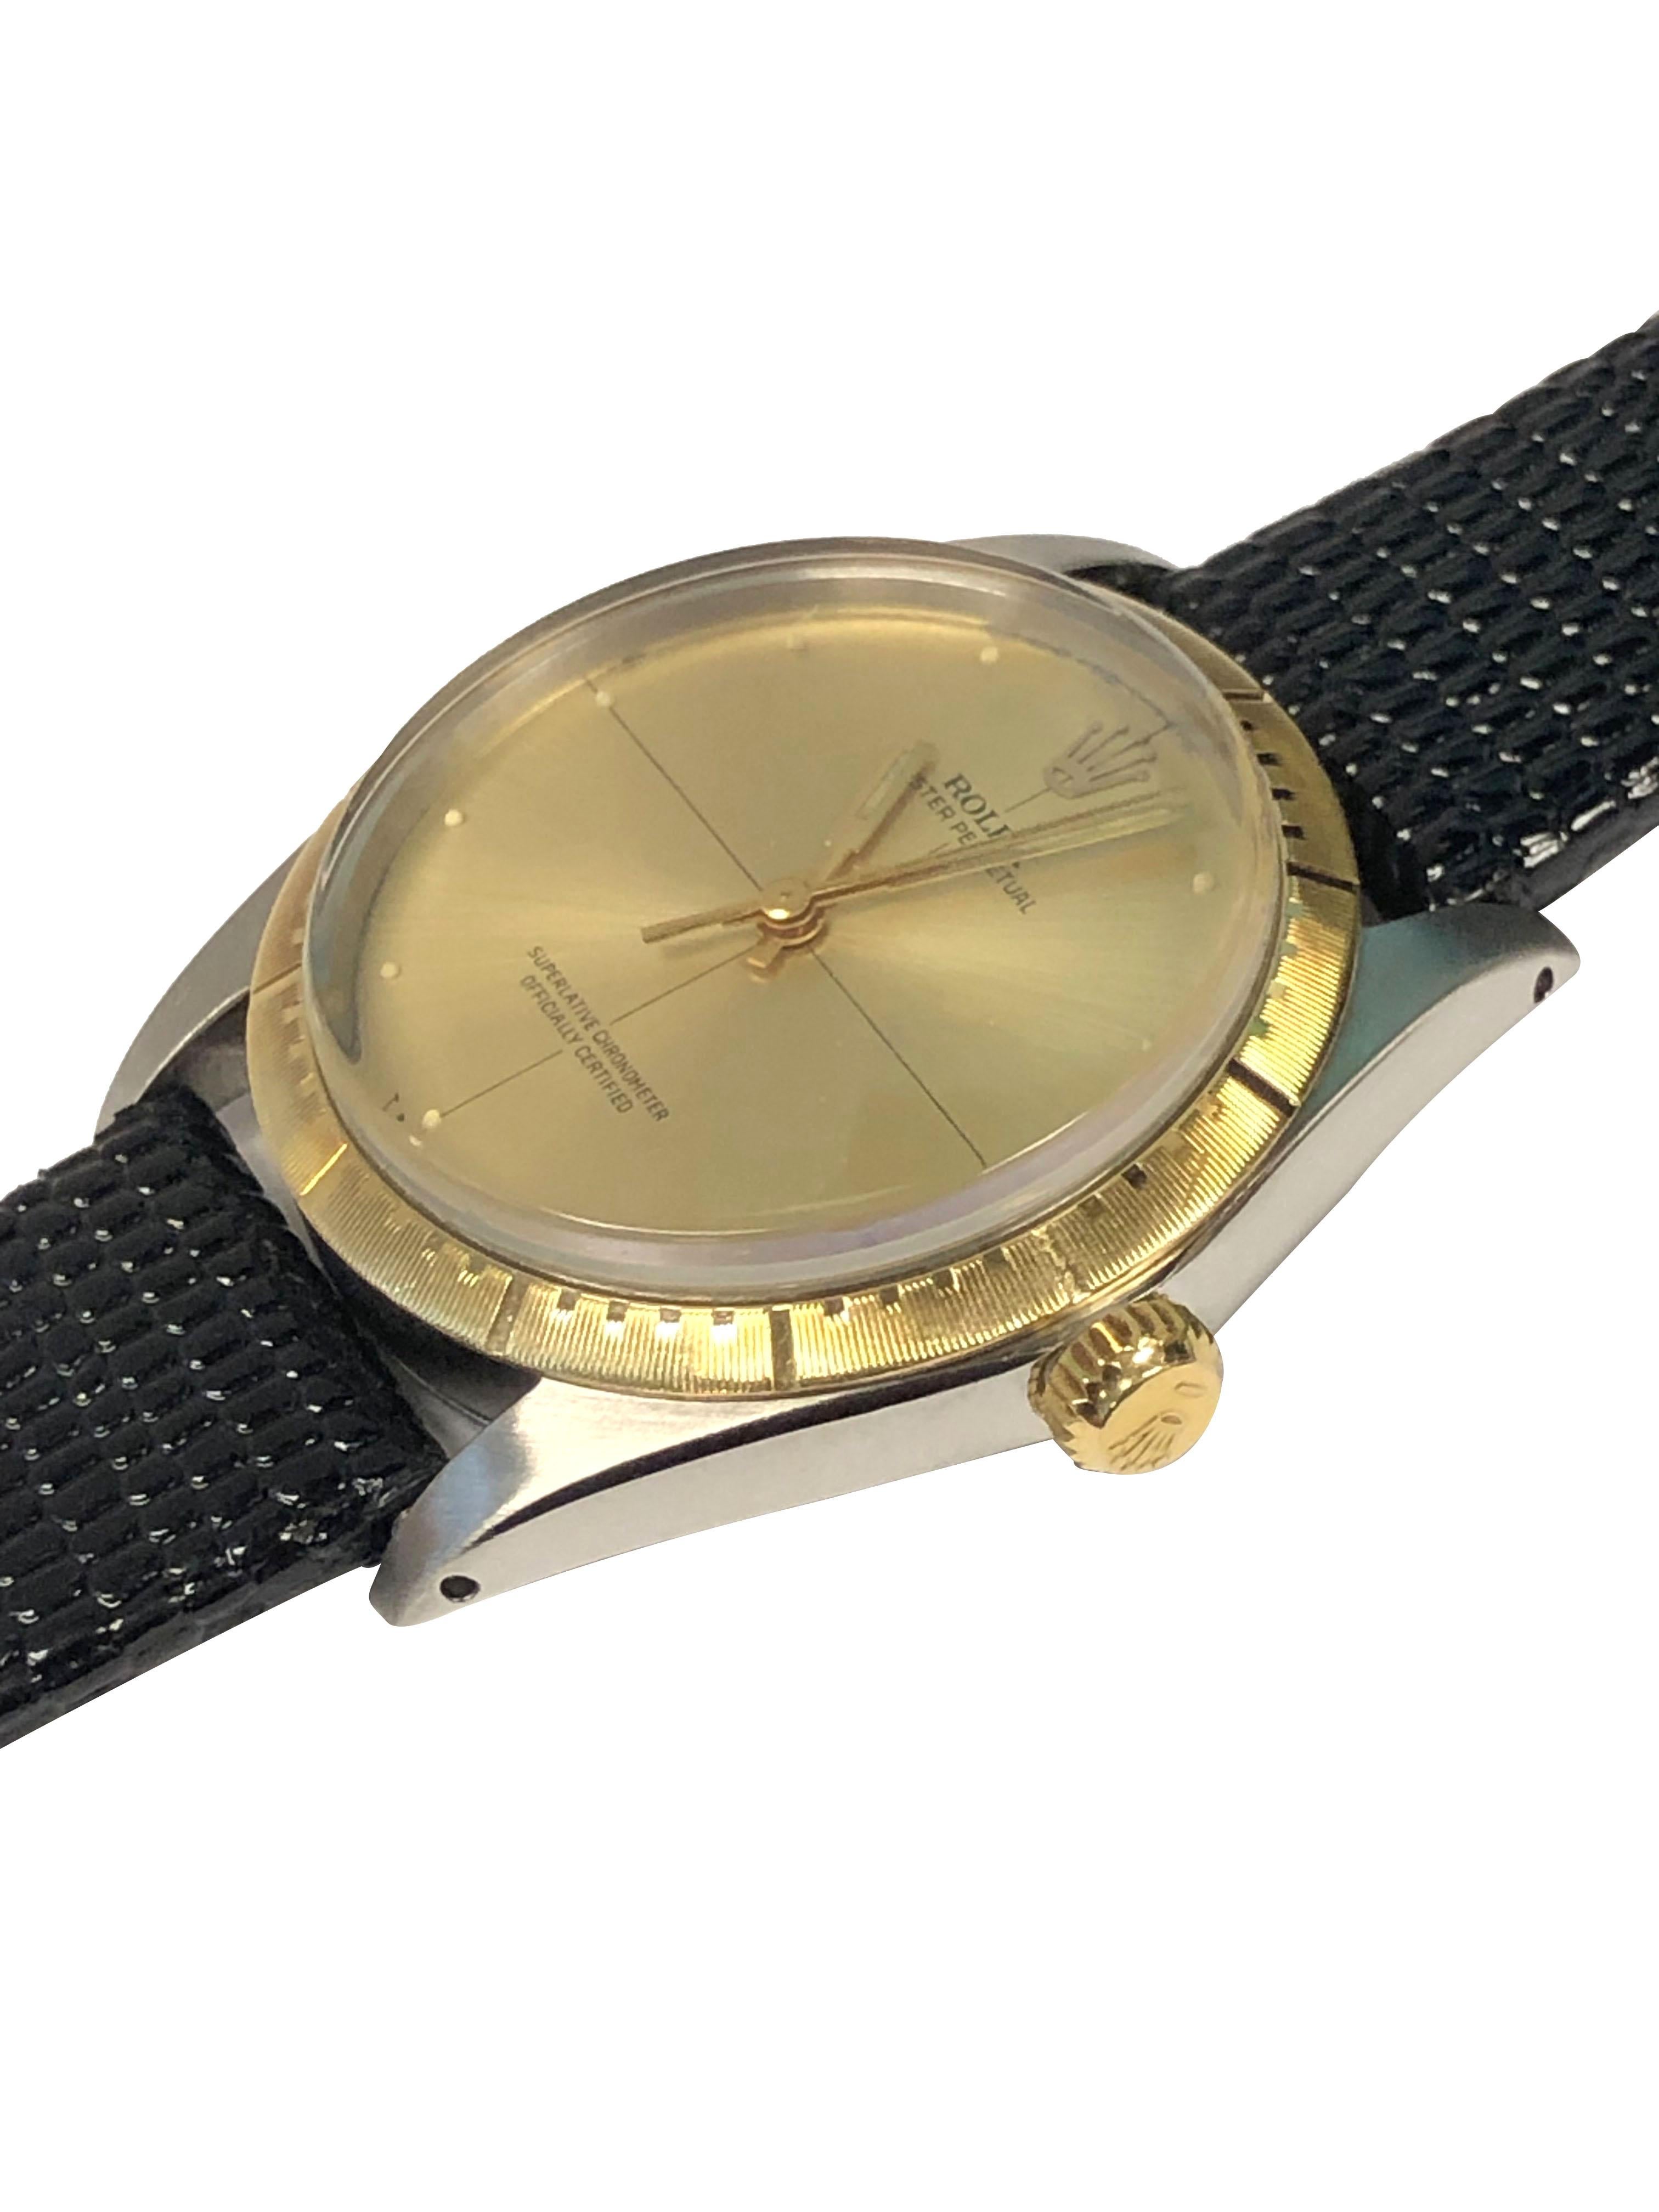 Circa 1967 Rolex Reference 1038 Wrist Watch, 35 M.M. 3 piece Stainless Steel case with 18k Zephyr Bezel and Gold crown. Caliber 1570 Automatic, Self winding movement, Original and Mint condition Gold Satin dial with applied Dot markers, Gilt hands